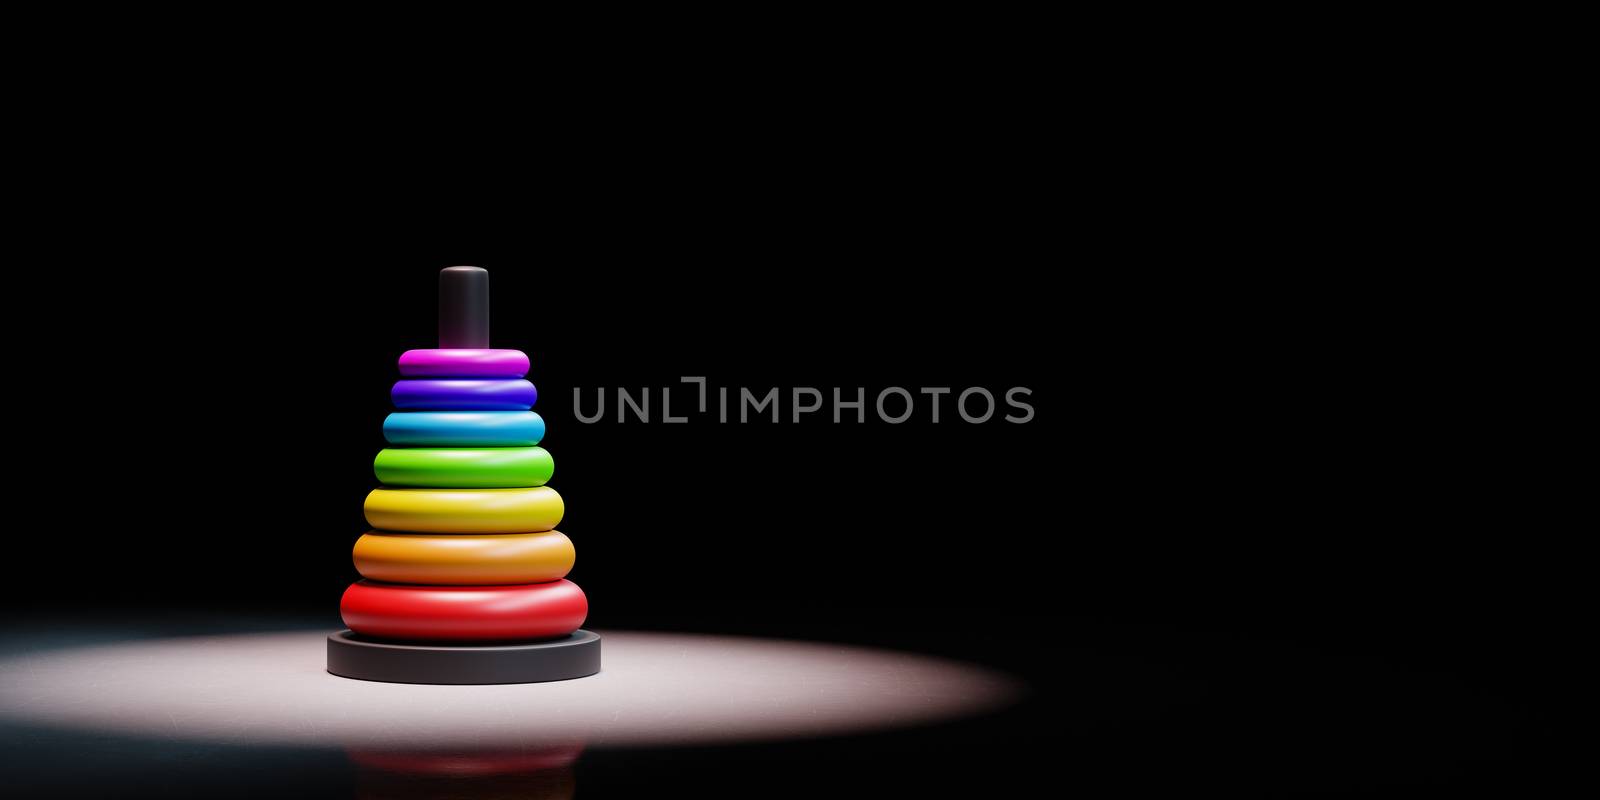 Stack of Rings in Ascending Order Spotlighted on Black Background by make